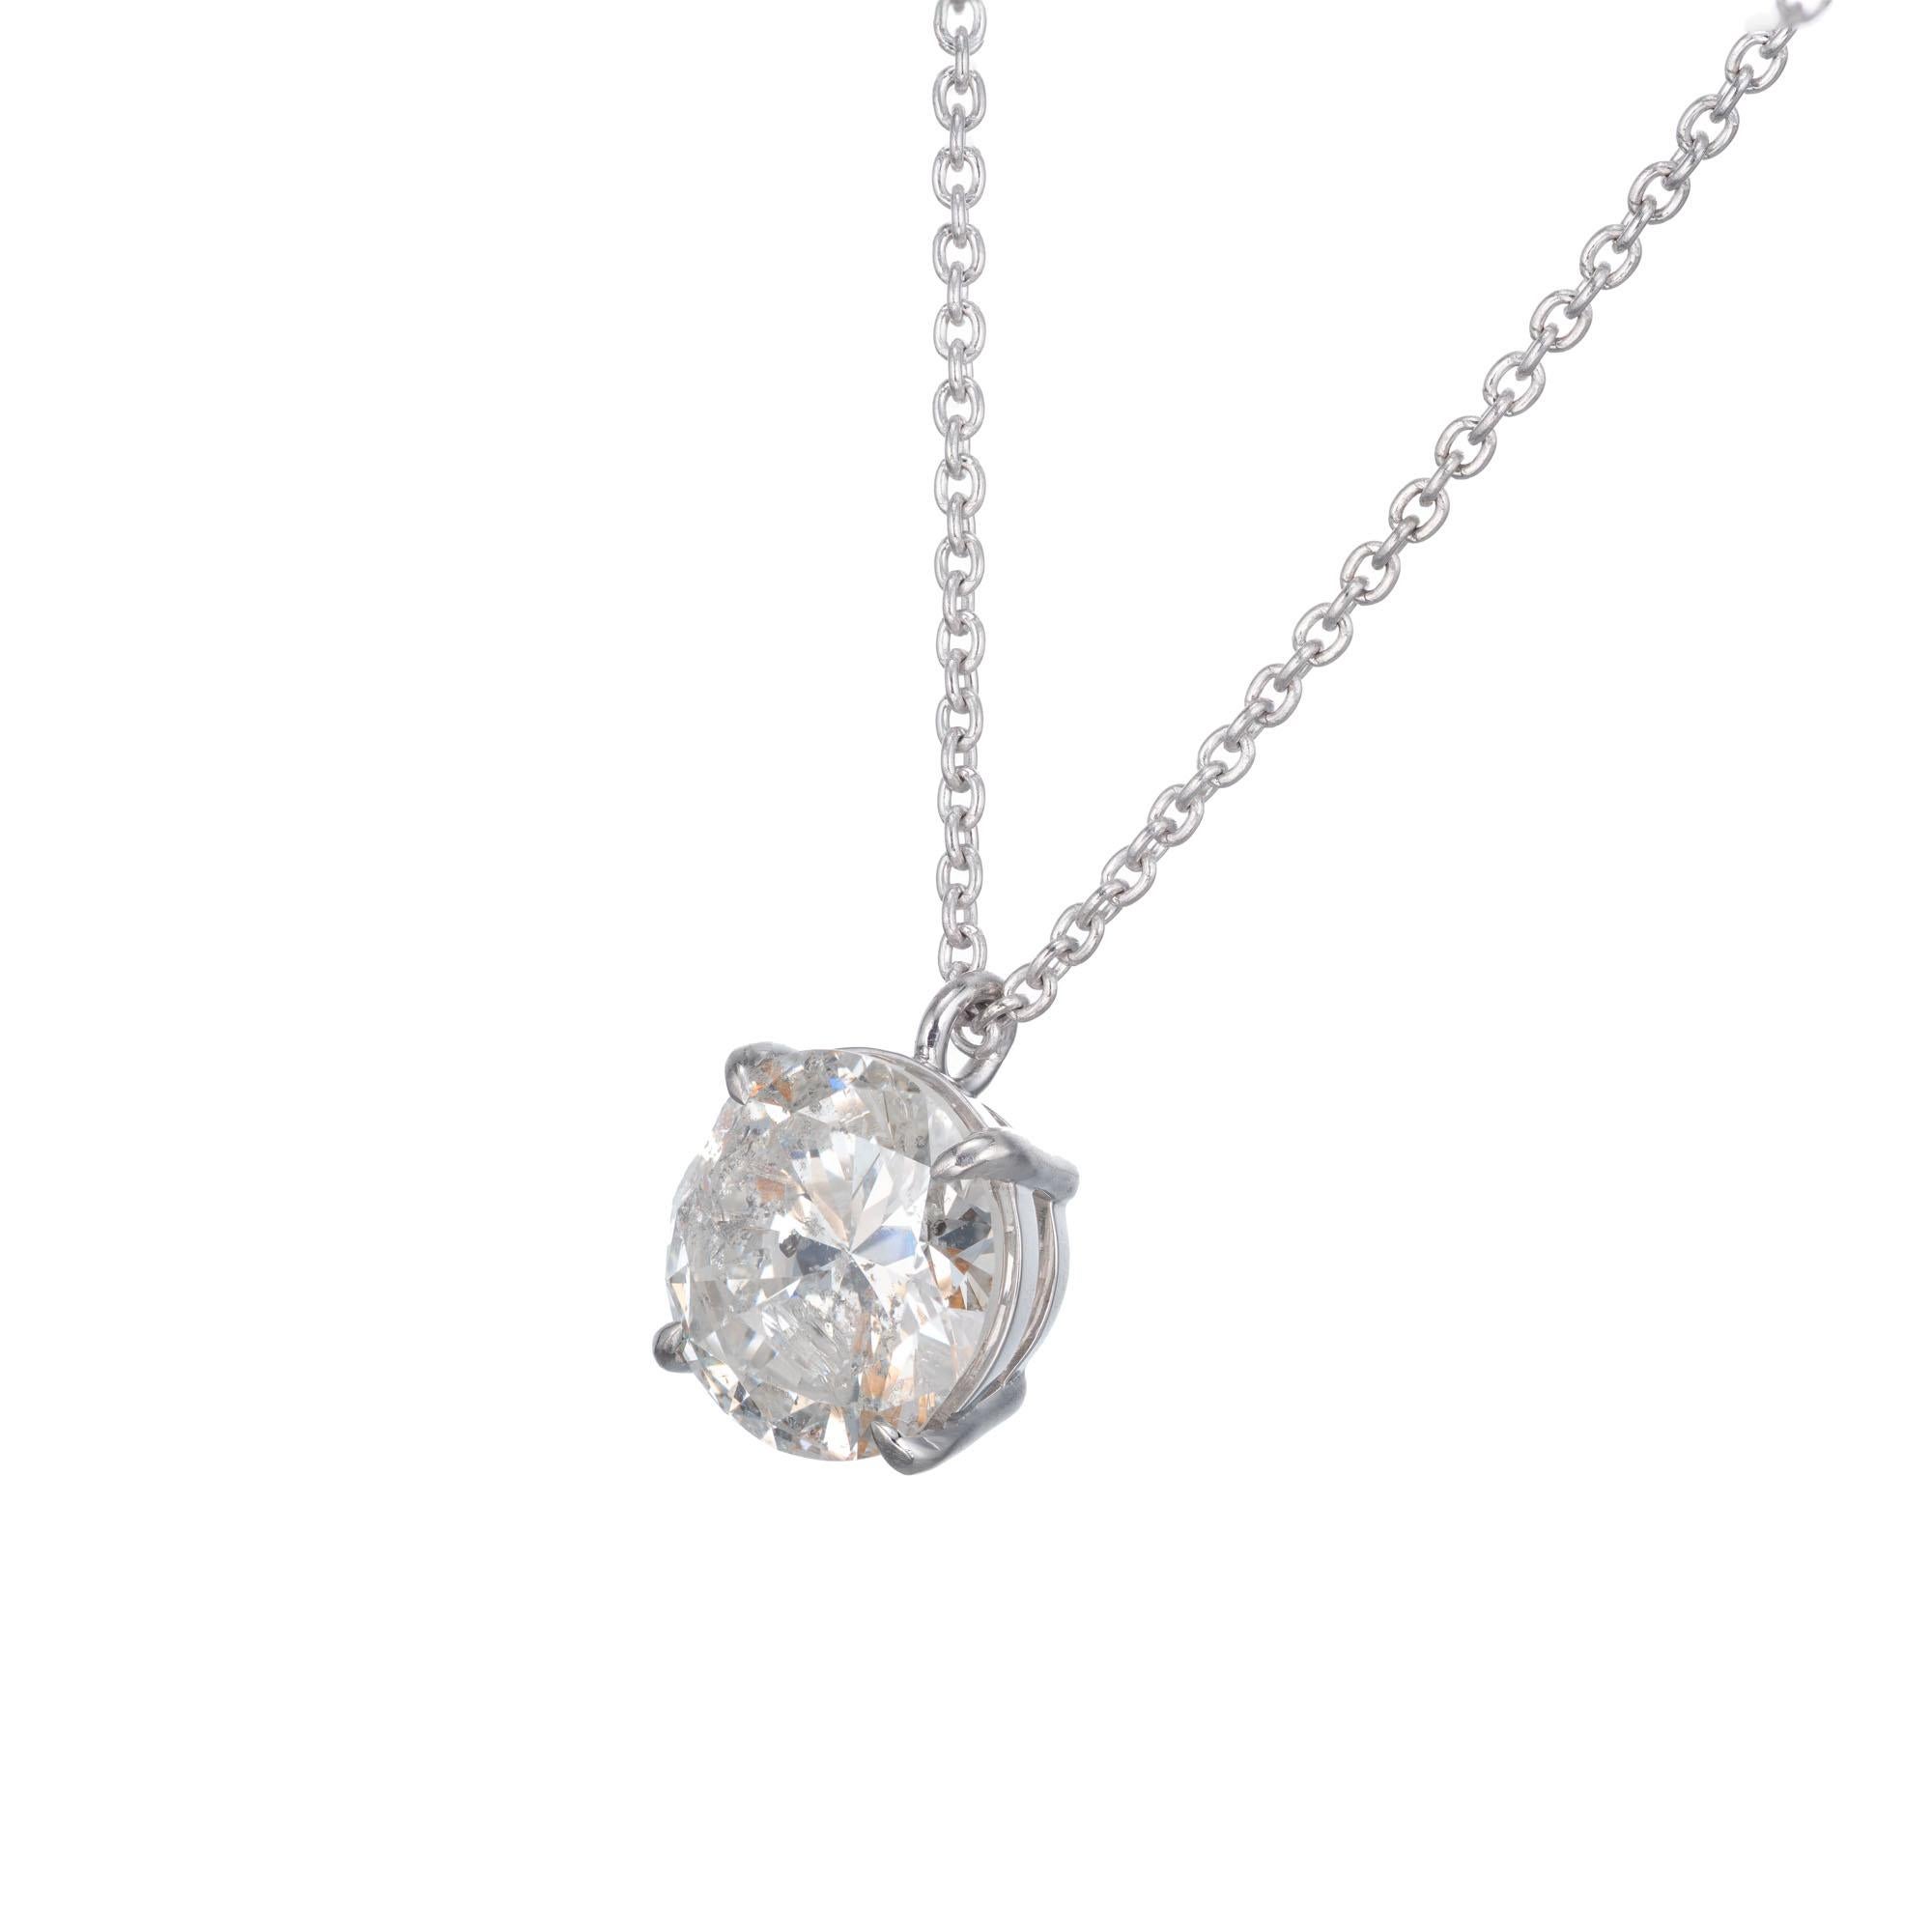 Large round brilliant cut 6.70 carat diamond set in a four prong platinum basket setting as pendant from an 18 Inch platinum chain with an adjustment ring at 16 Inches. 

1 round brilliant cut diamond H-I I2, approx. 6.72ct EGL Certificate # US